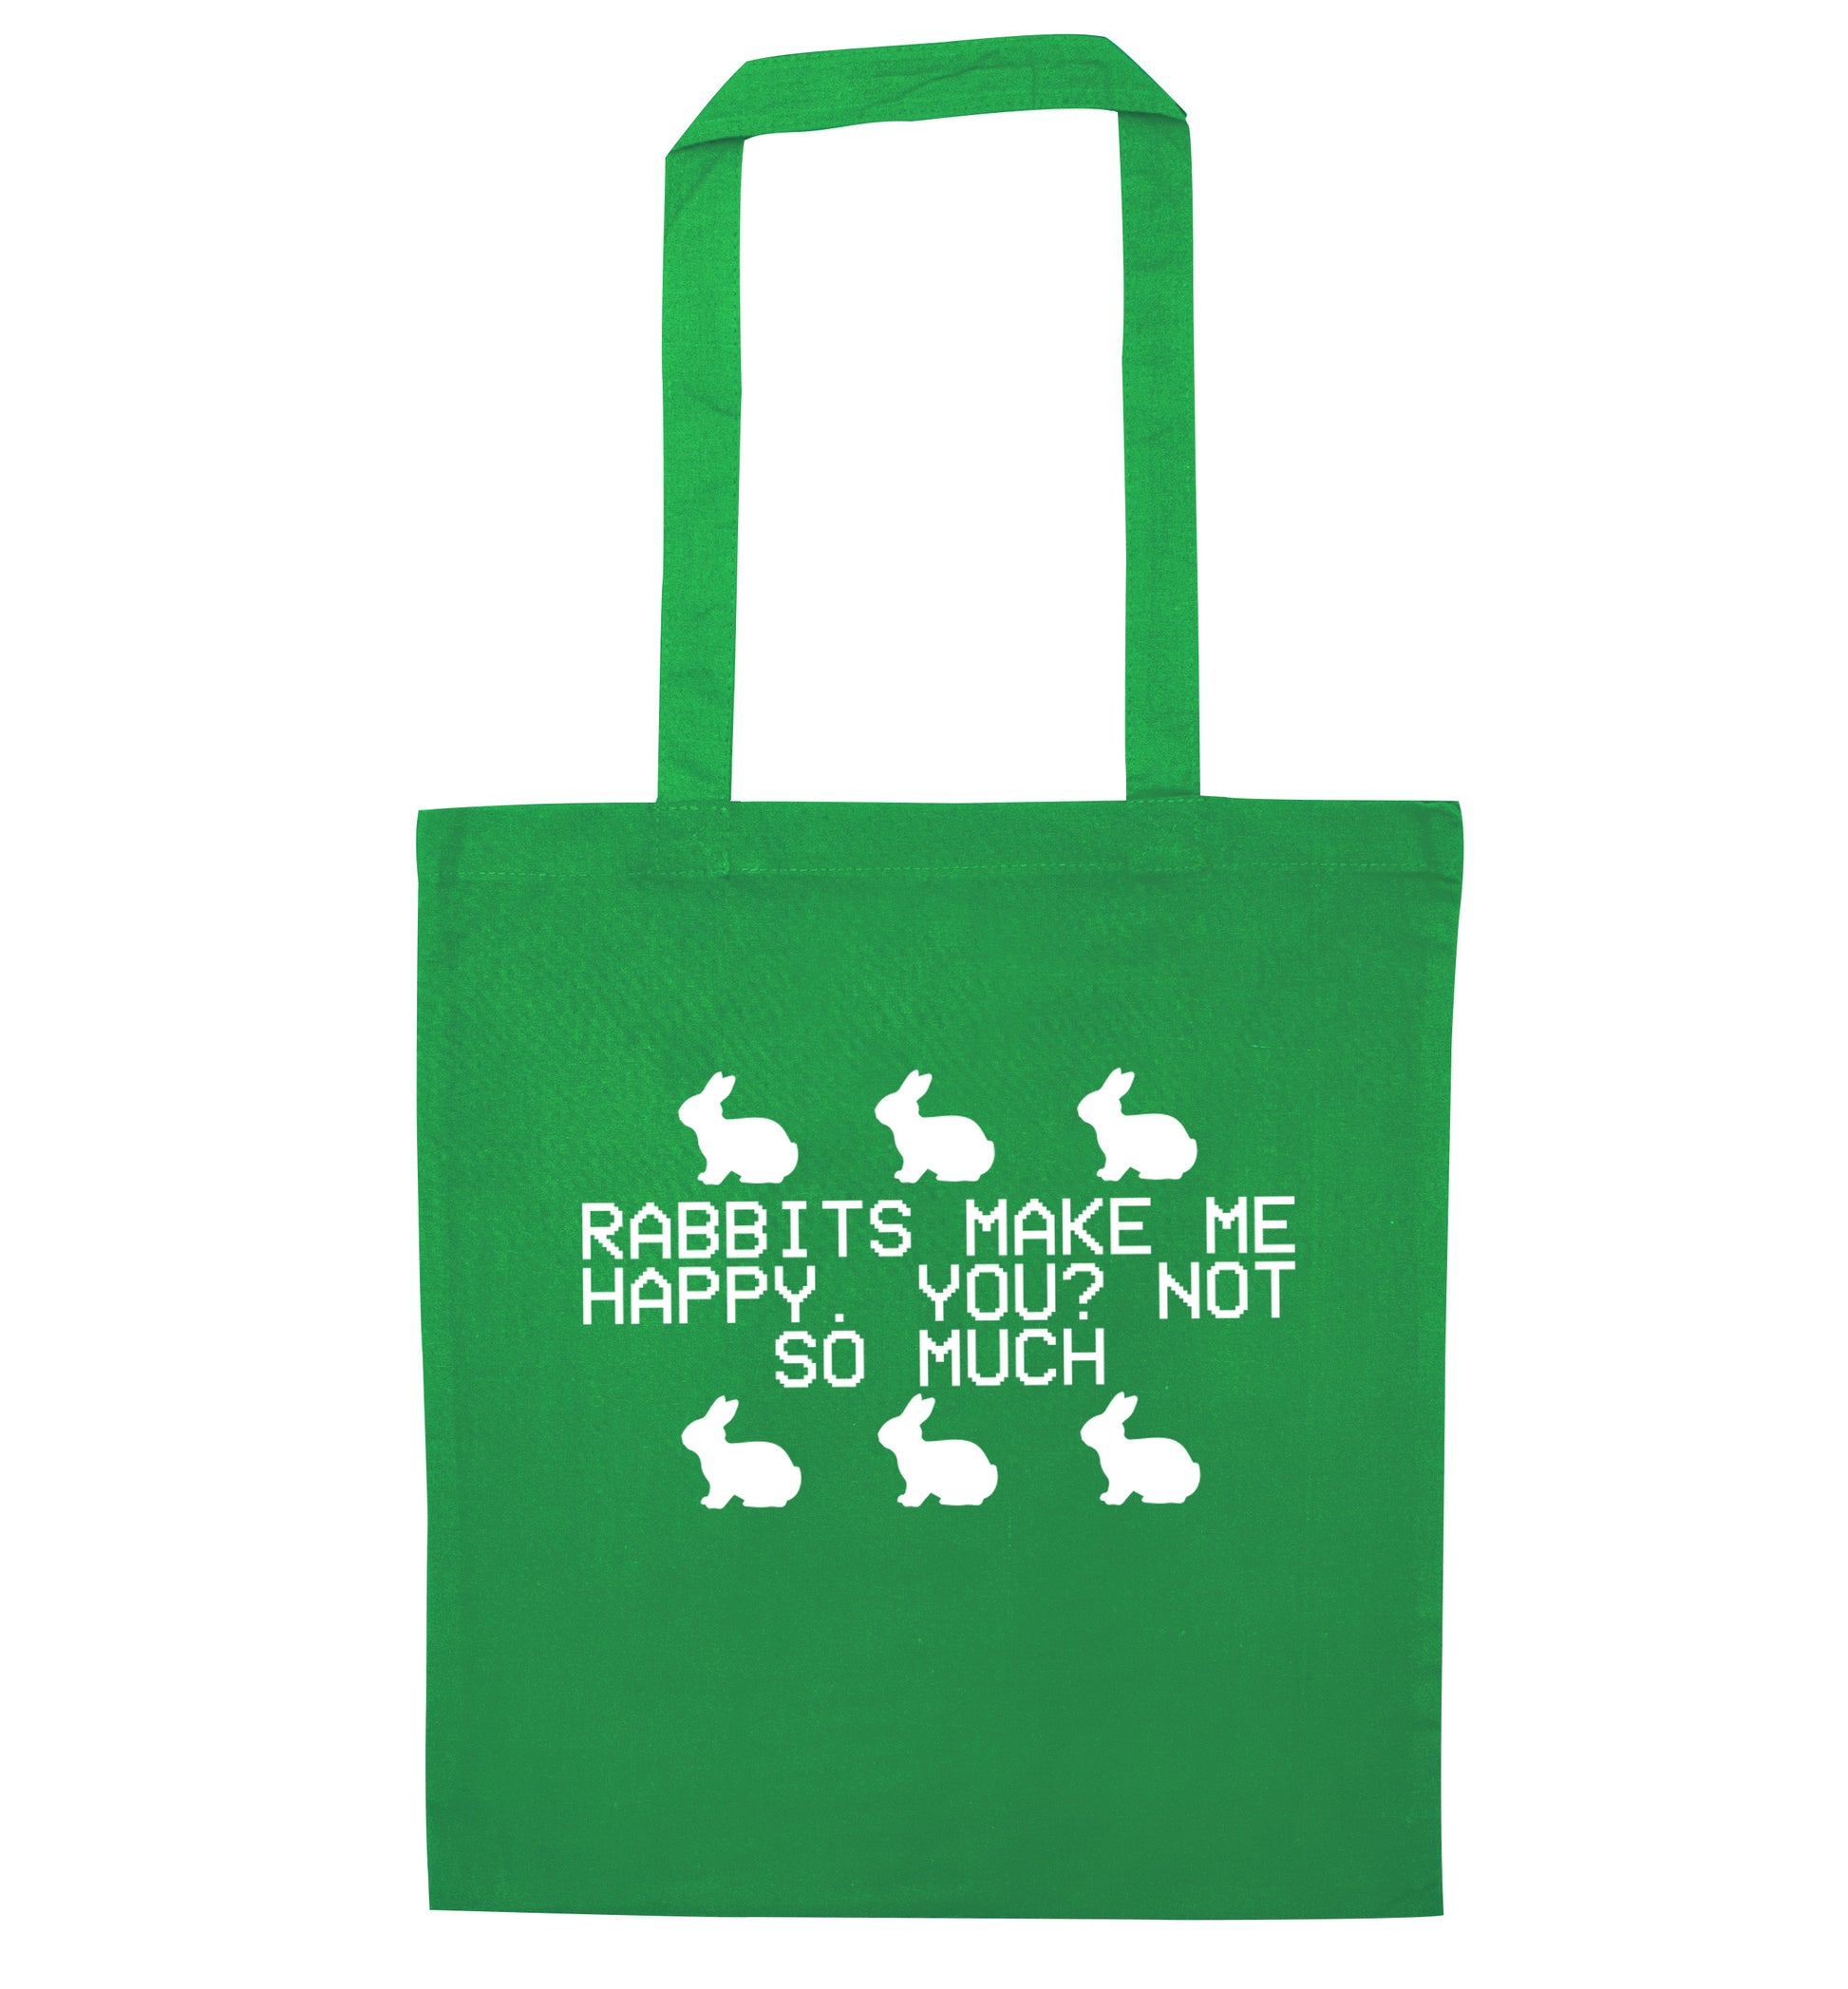 Rabbits make me happy, you not so much green tote bag